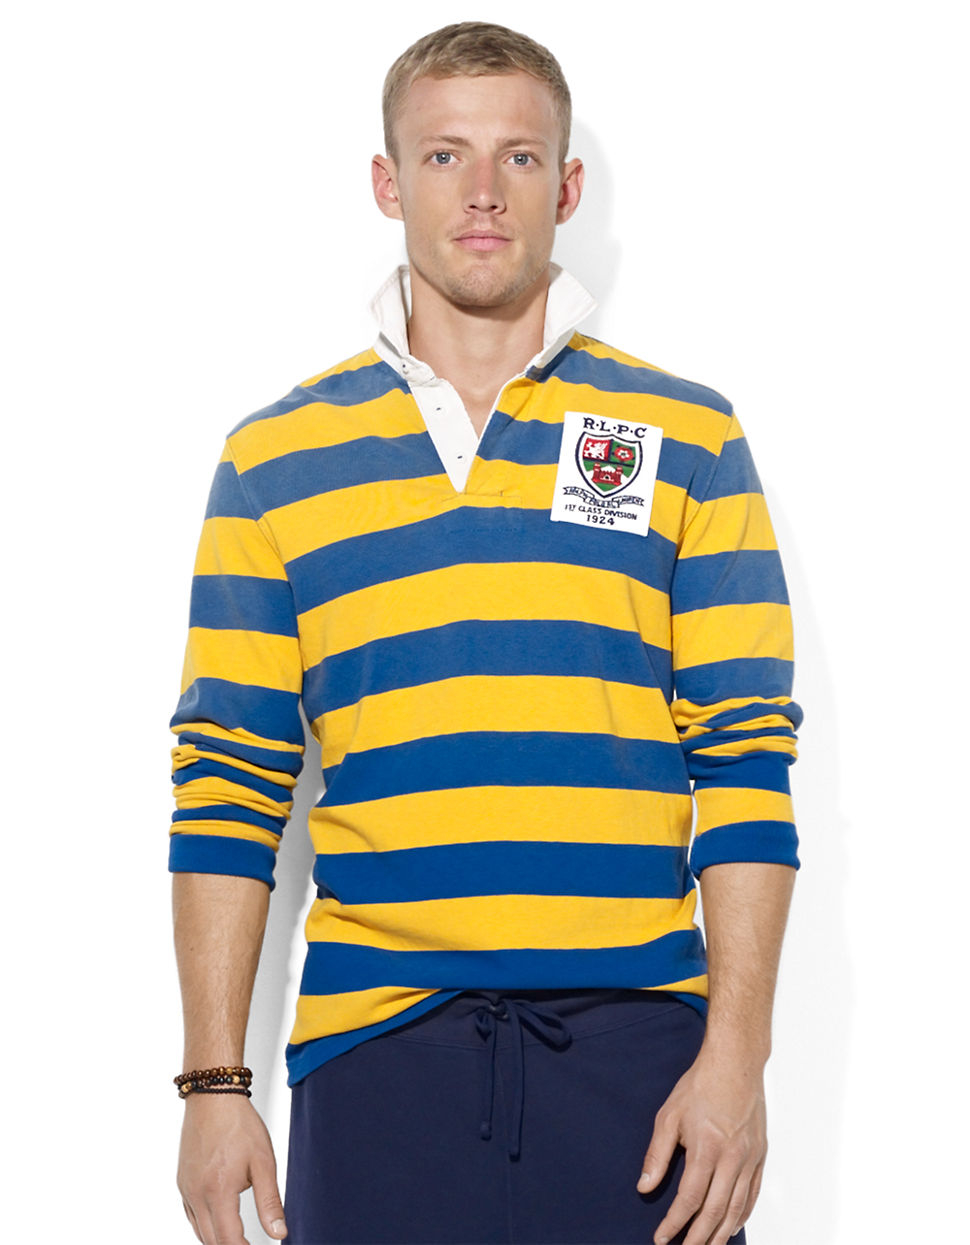 Lyst - Polo Ralph Lauren Striped Rugby Shirt in Yellow for Men